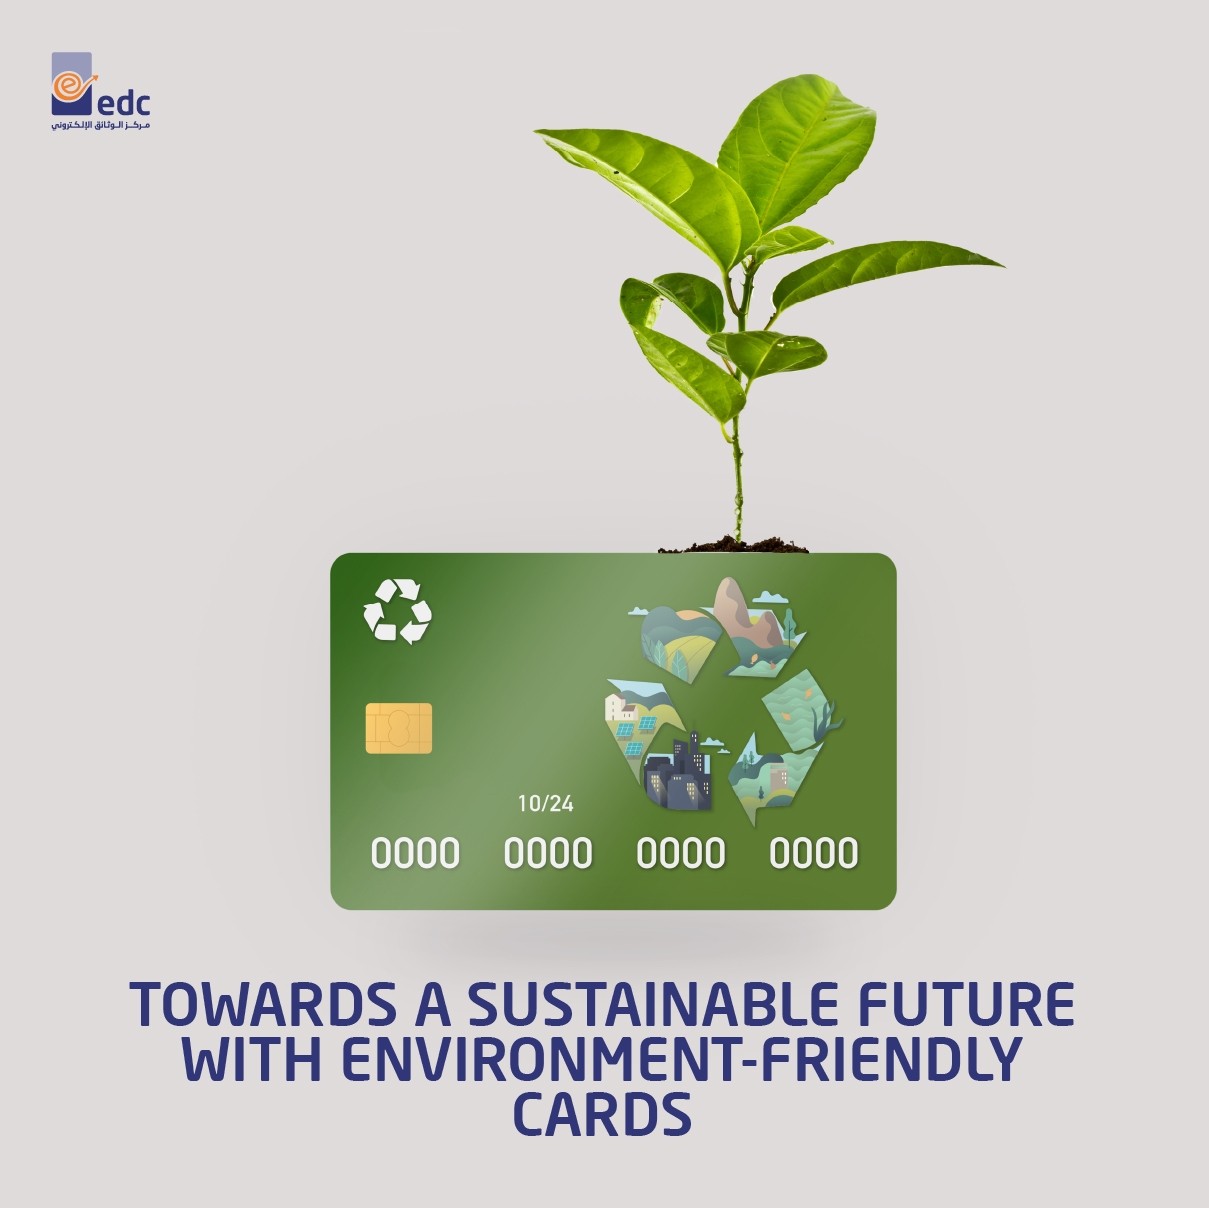 Towards a Sustainable Future with Eco-Friendly Cards